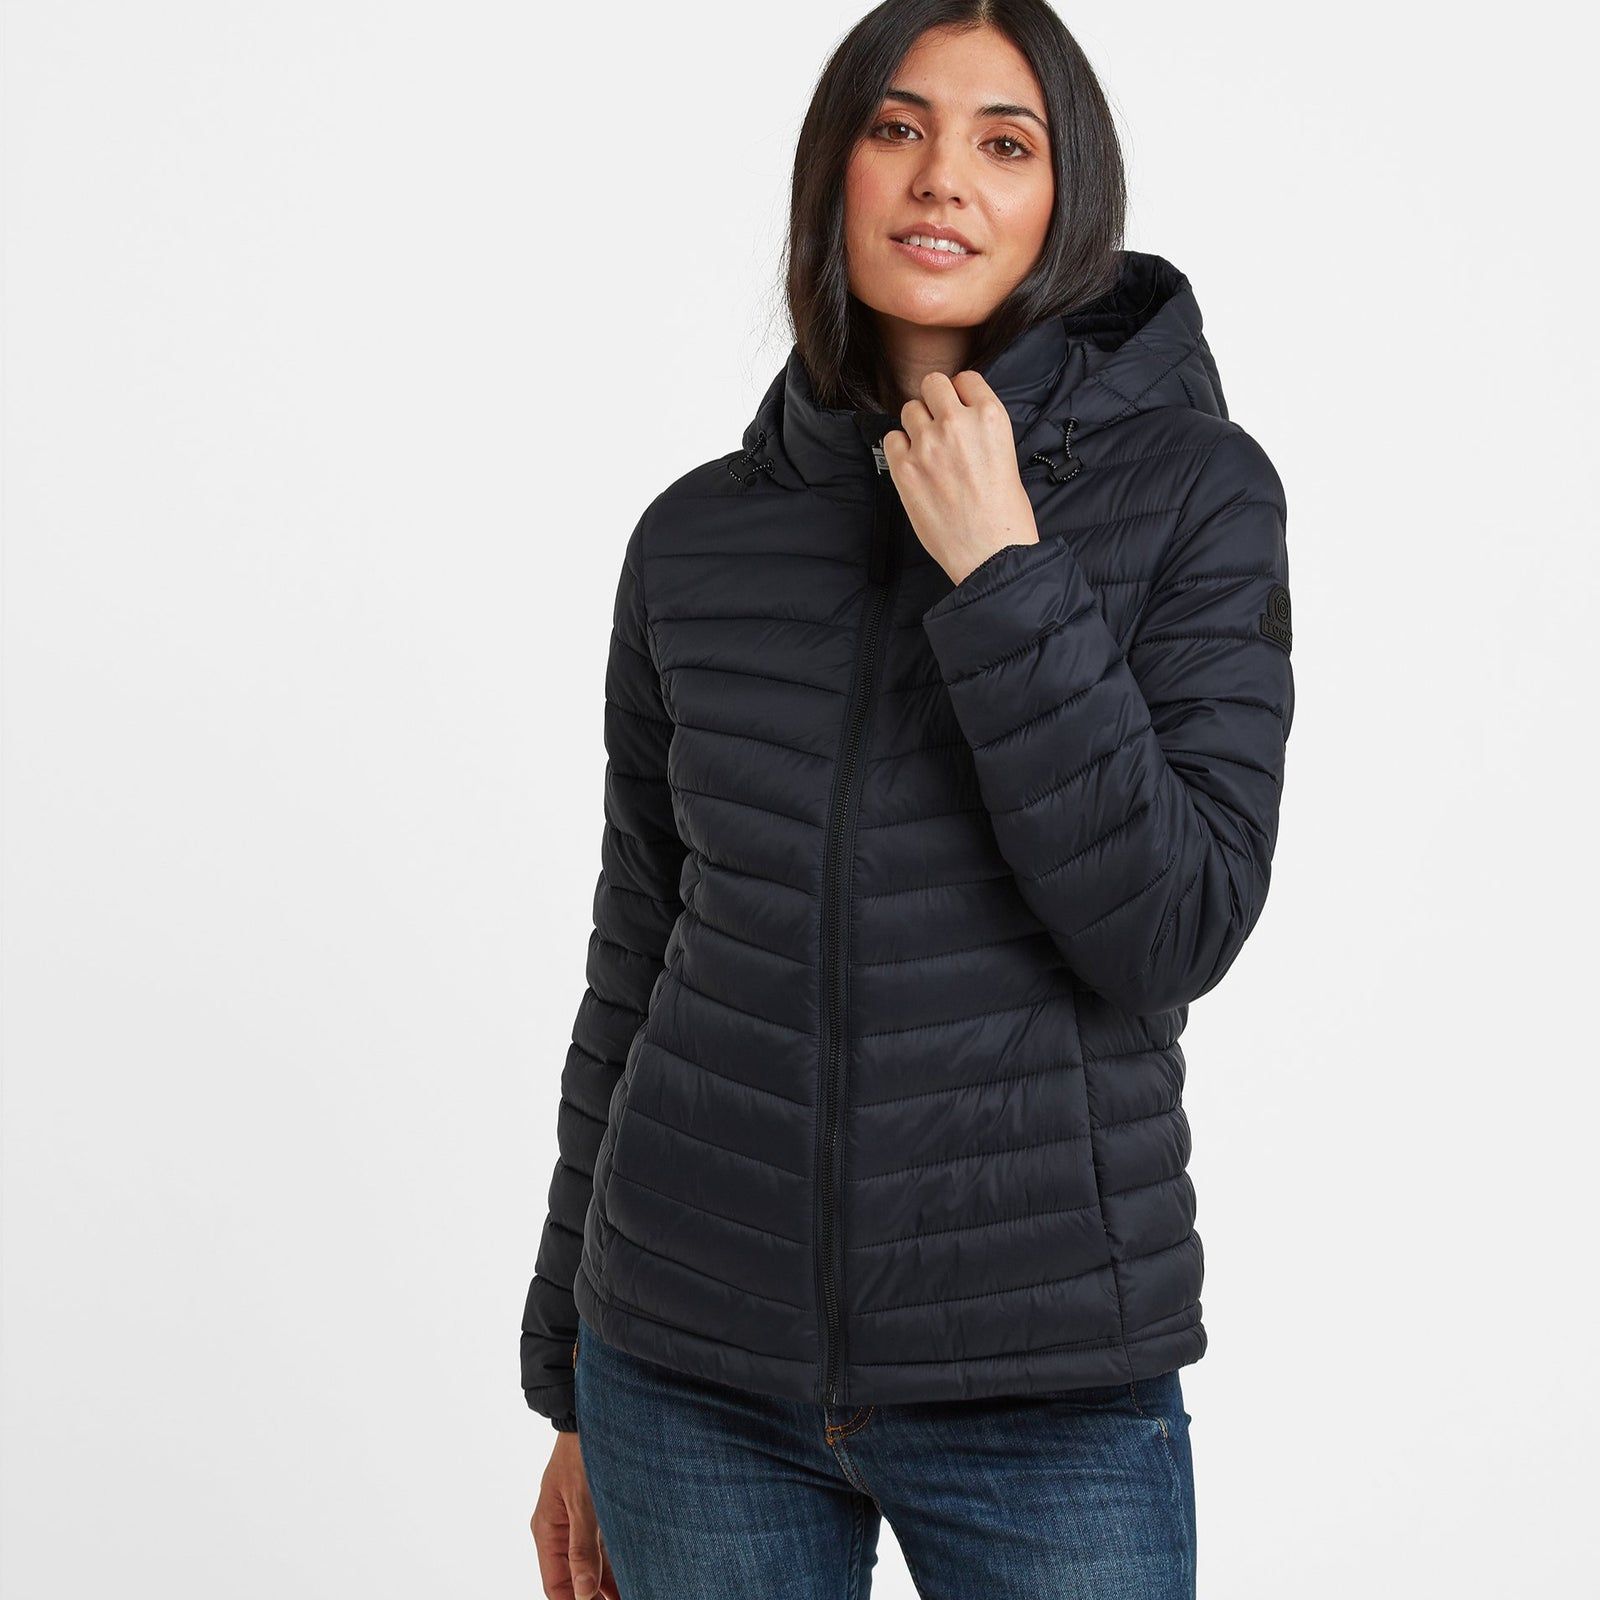 Lightweight, wind resistant and buttery soft, our Garriston quilted jacket gives you warmth without adding bulk and is designed in bold, chevron colour blocks inspired by moorland heather and the churning Atlantic sea. This distinctive and versatile jacket is perfect for travel as it squishes down small and springs back into shape when you need it. The thermal filling is made from recycled plastic bottles, so you'll be doing your bit to protect the environment too. Garriston has a cosy inner collar for added comfort and a fixed, insulated hood with toggle adjusters. There are two handy zip up pockets and a full length, easy pull zip at the front. The finishing touch is our iconic embossed rubber Yorkshire Rose badge on the sleeve.